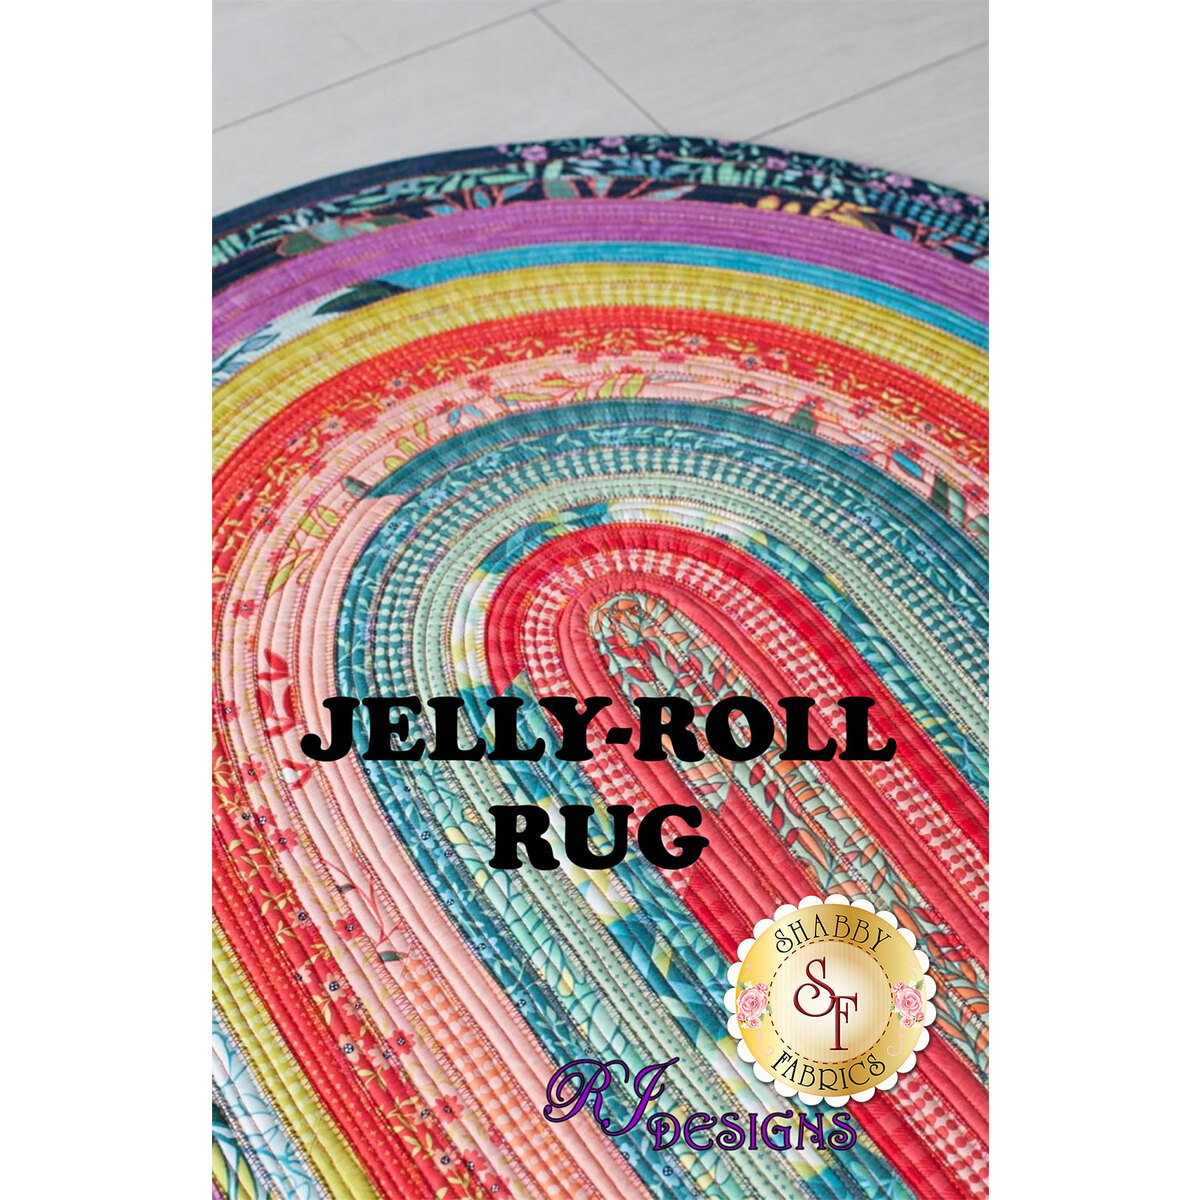 Clover Fabric Tube Maker for Jelly Roll Rugs